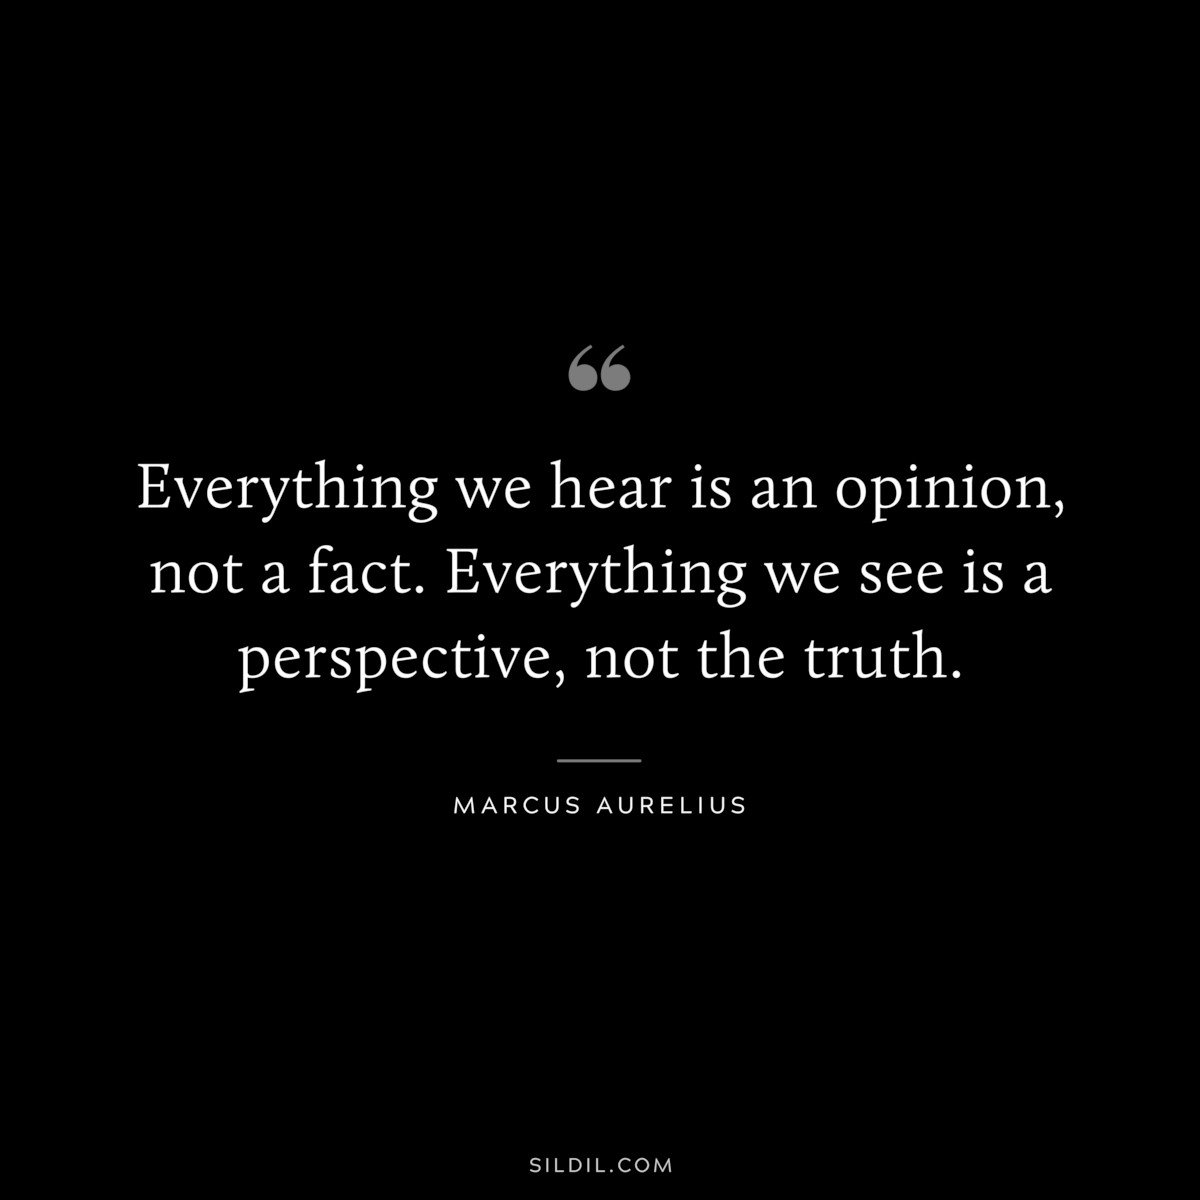 Everything we hear is an opinion, not a fact. Everything we see is a perspective, not the truth. ― Marcus Aurelius